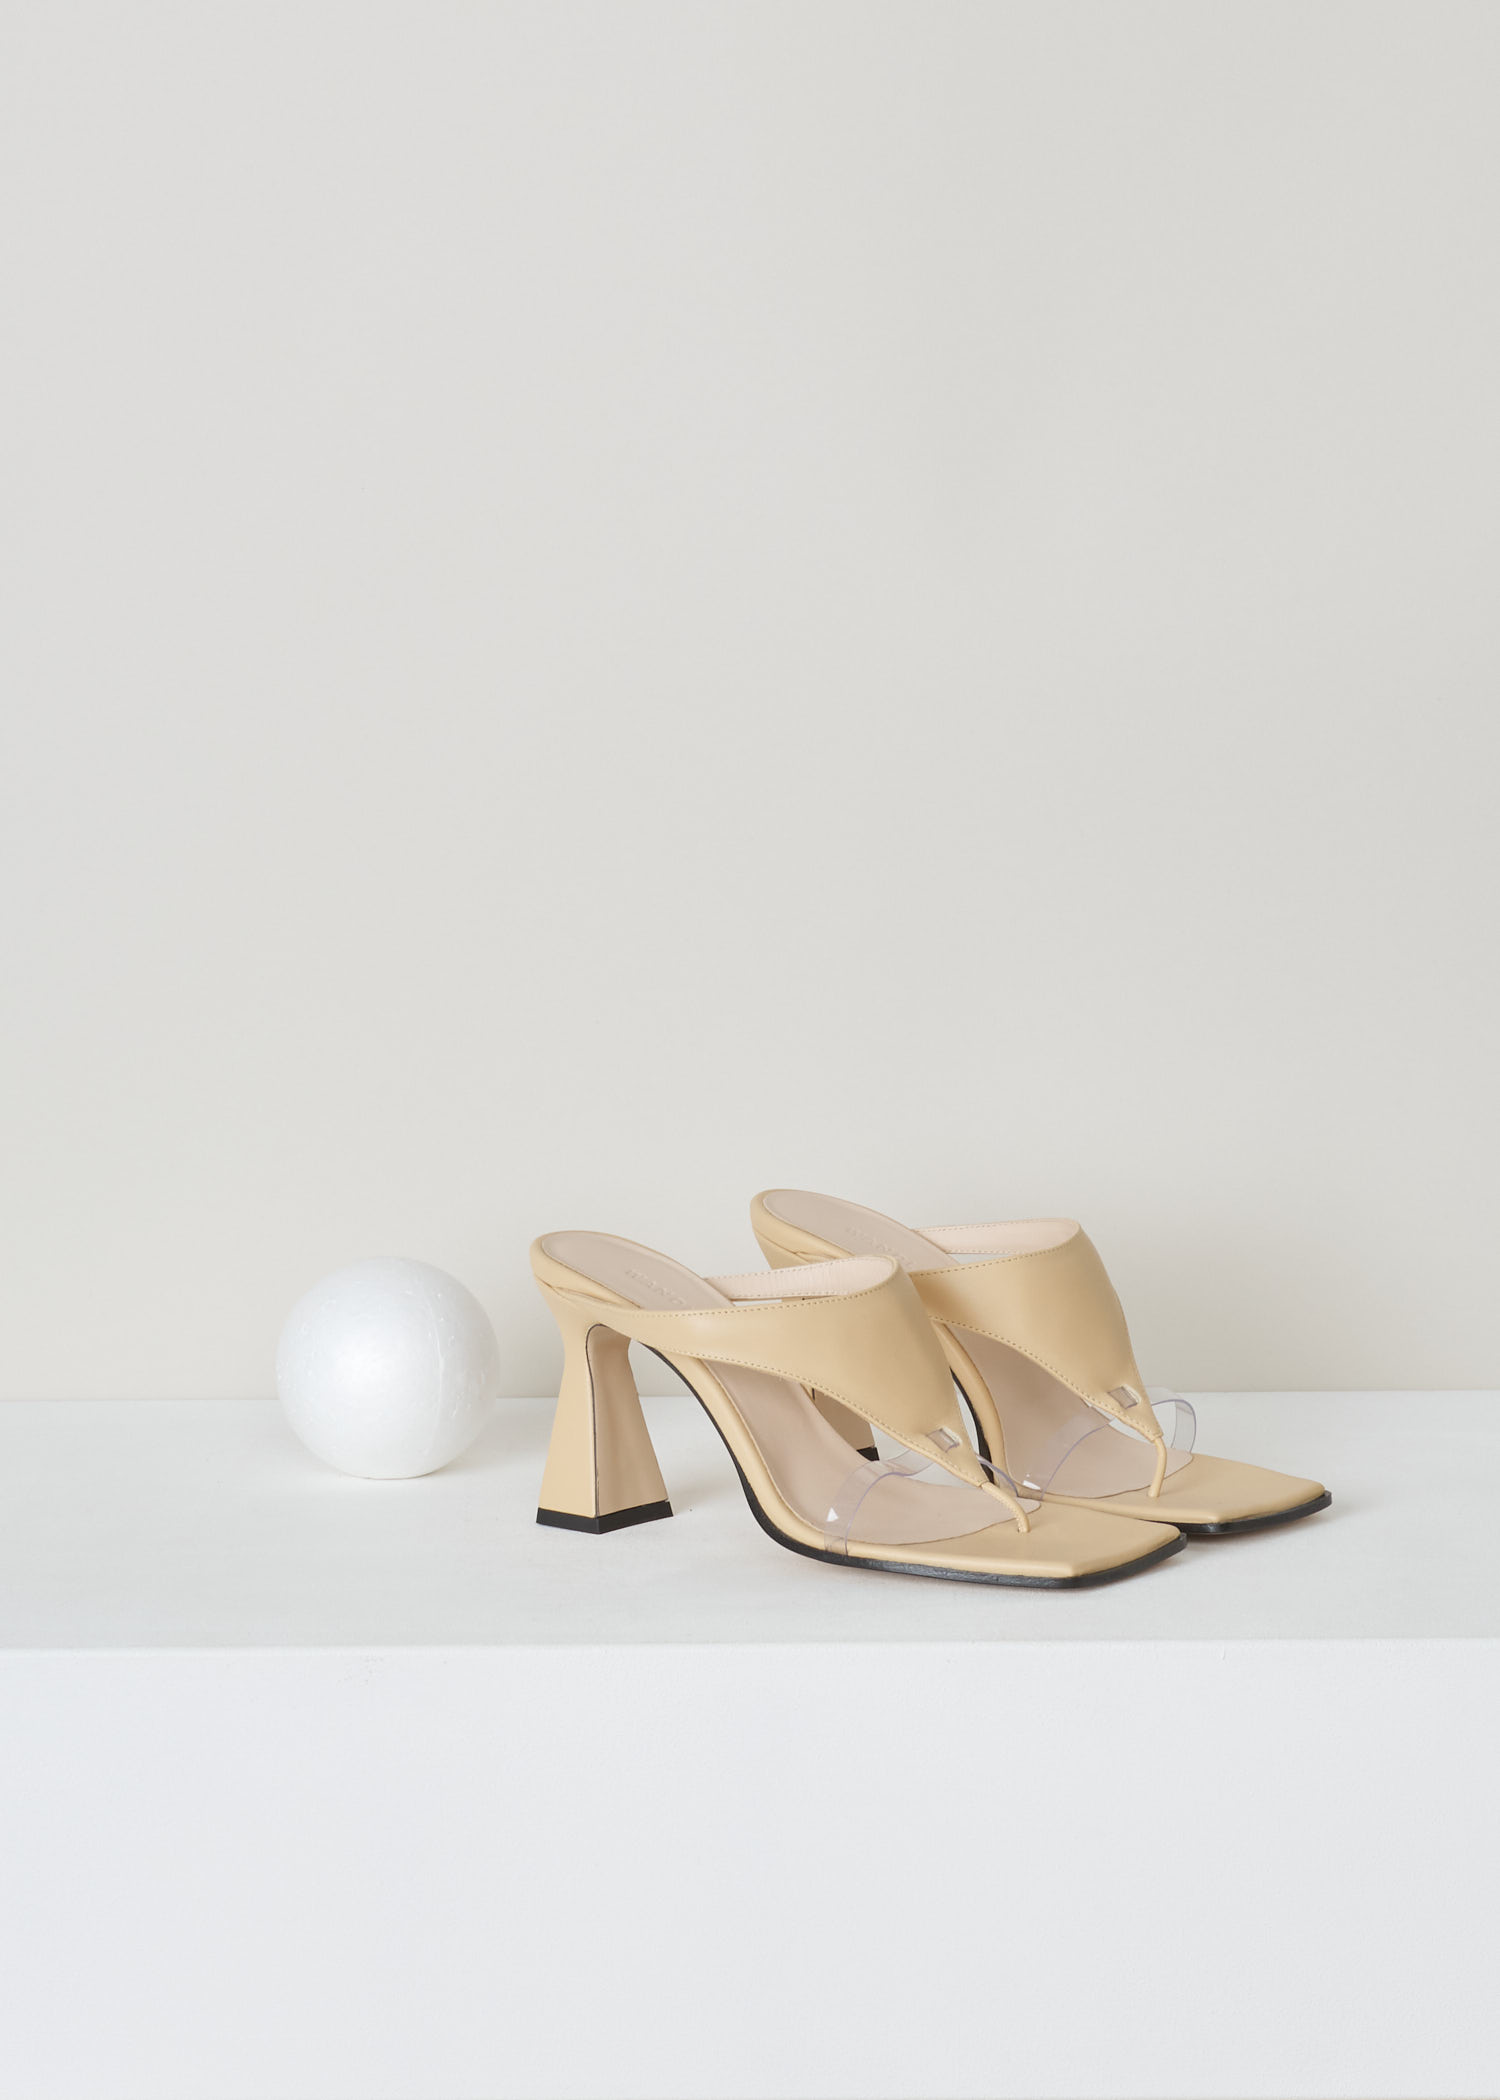 Wandler, Lambskin cashew sandal, Feline_Sandal_Lambskin_Leather_Cashew, beige, front, Lambskin mules, comes in cashew color. Featuring square-cut open toes and lightly padded straps for extra comfort.